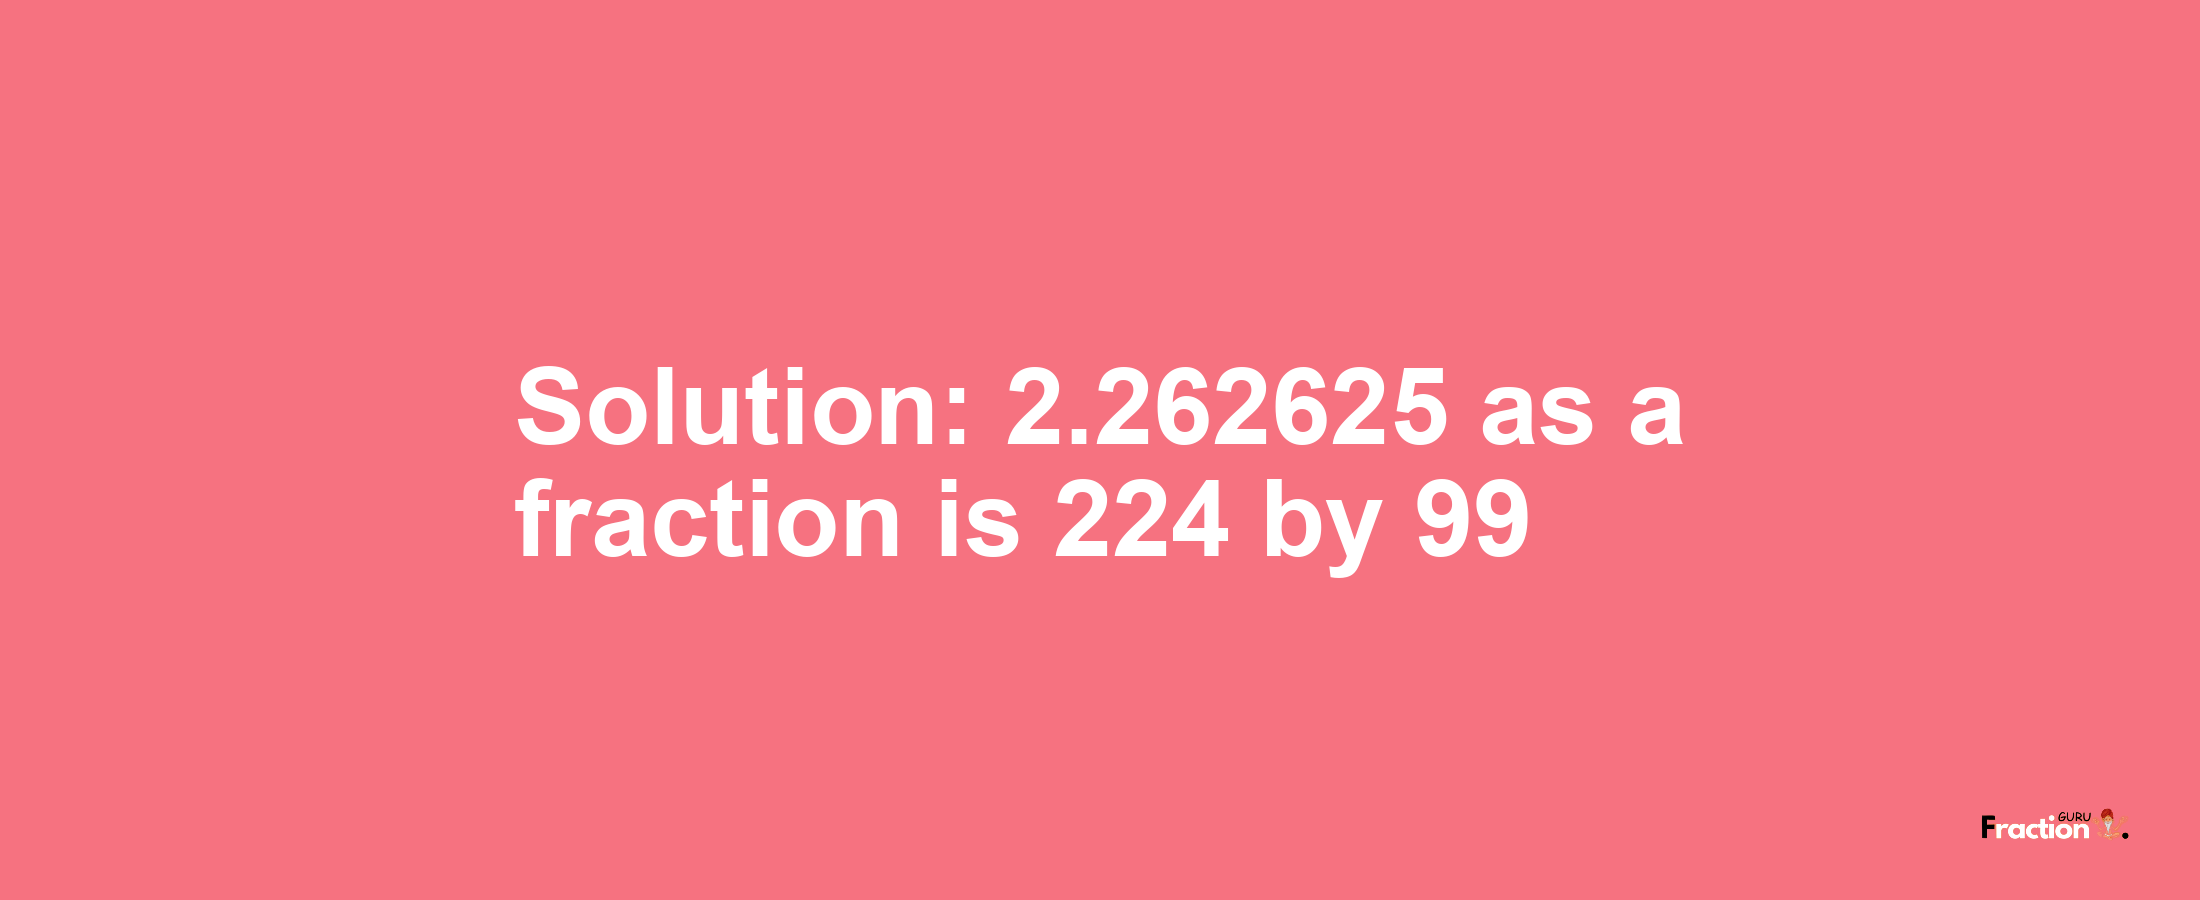 Solution:2.262625 as a fraction is 224/99